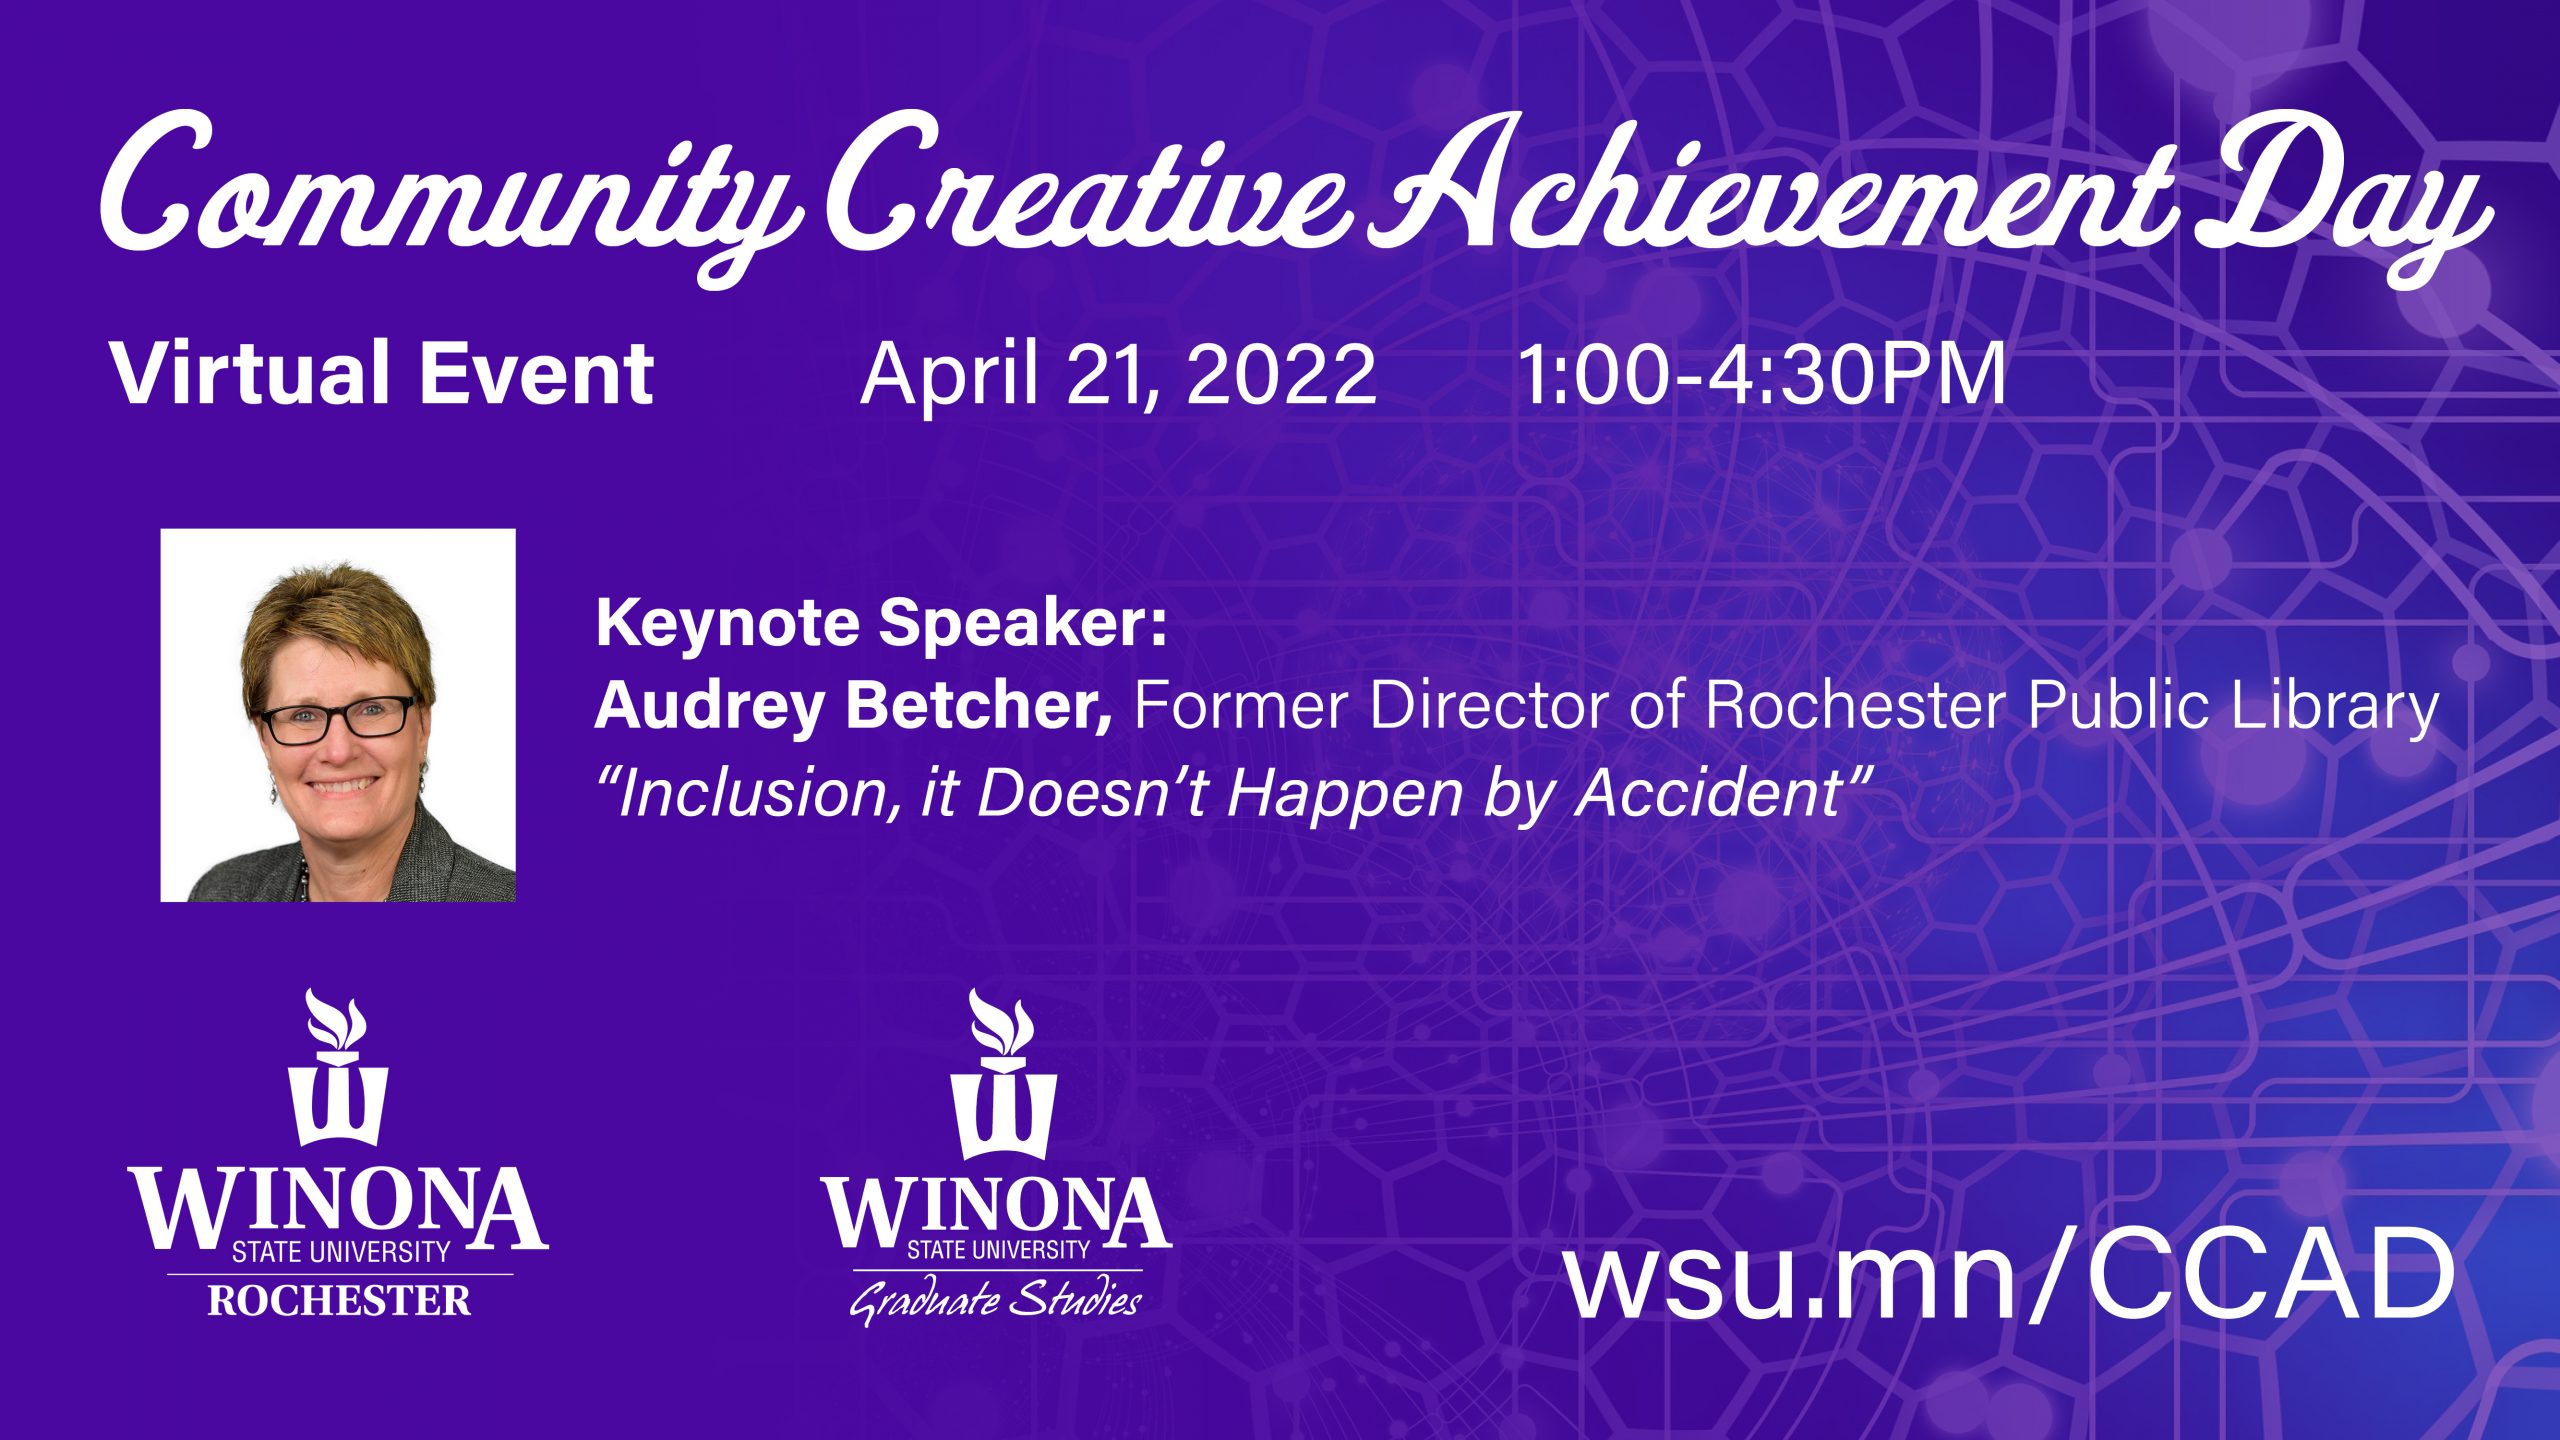 Community Creative Achievement Day will be held online on Thursday, April 21, 2022 from 1 PM to 4:30 PM